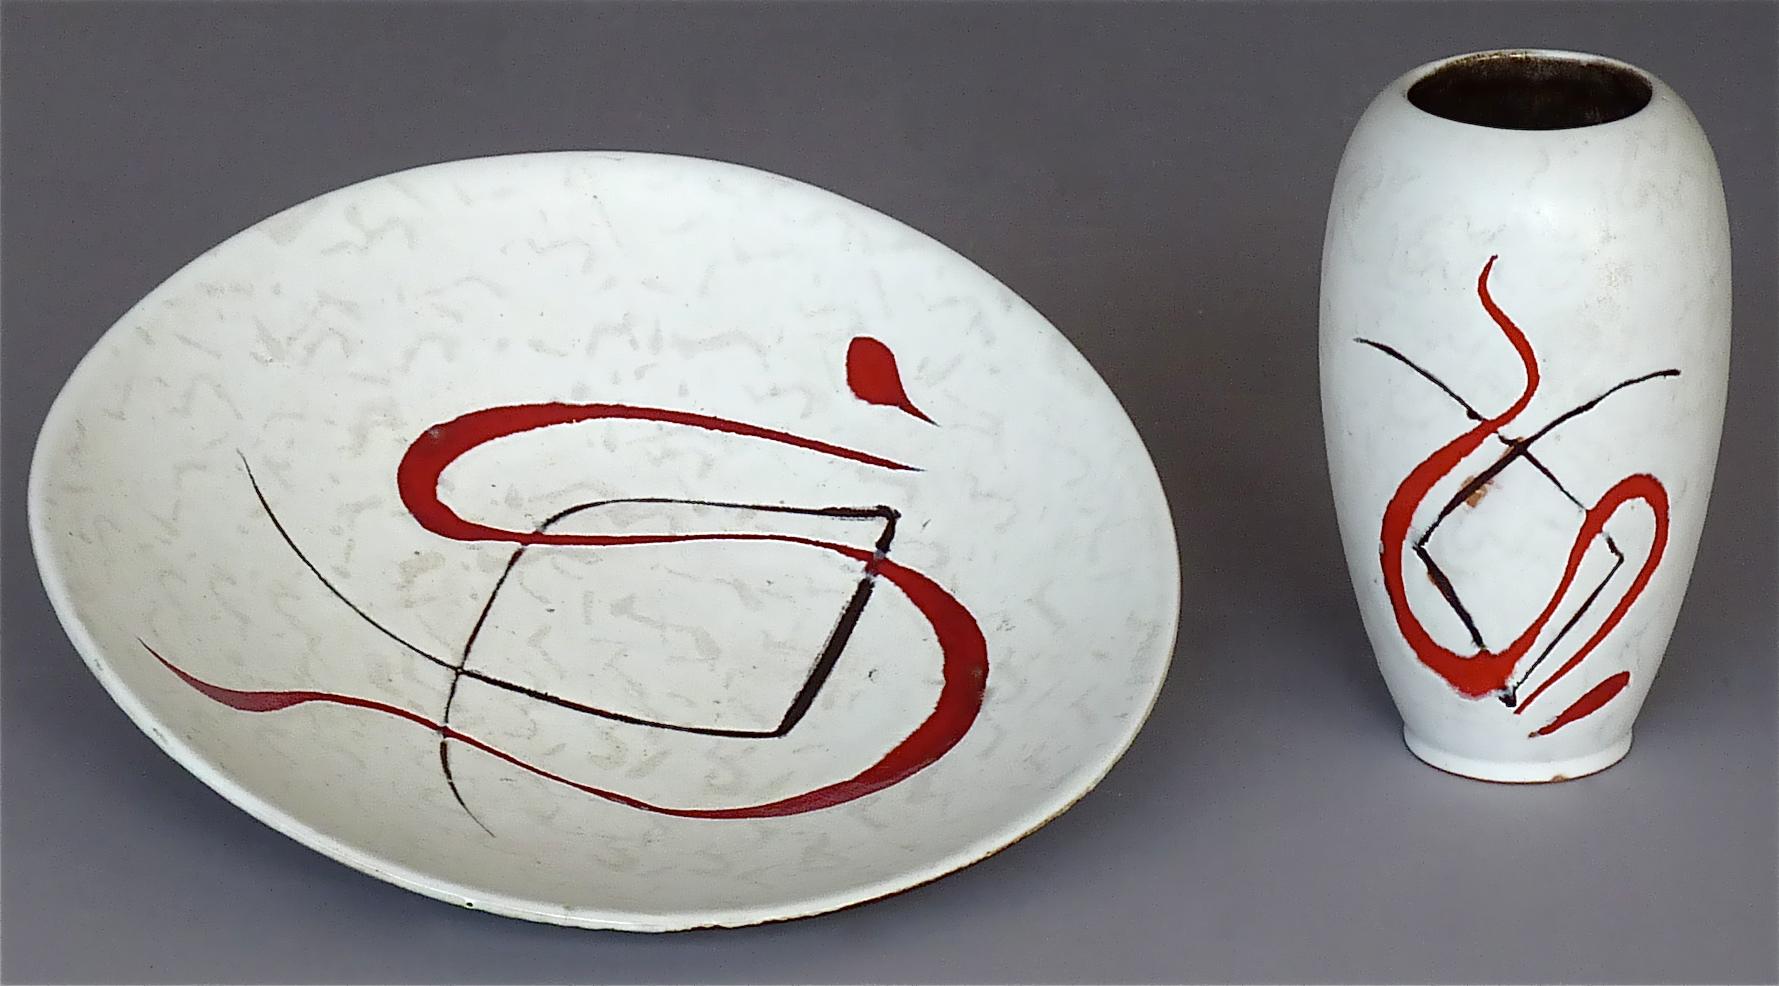 Midcentury abstract art ceramic vase and organic formed bowl probably, made in Italy, France or Germany, circa 1950. The ovoid vase and the rounded freeform big bowl have a mainly white and faint spotty grey glaze with a black and bright red